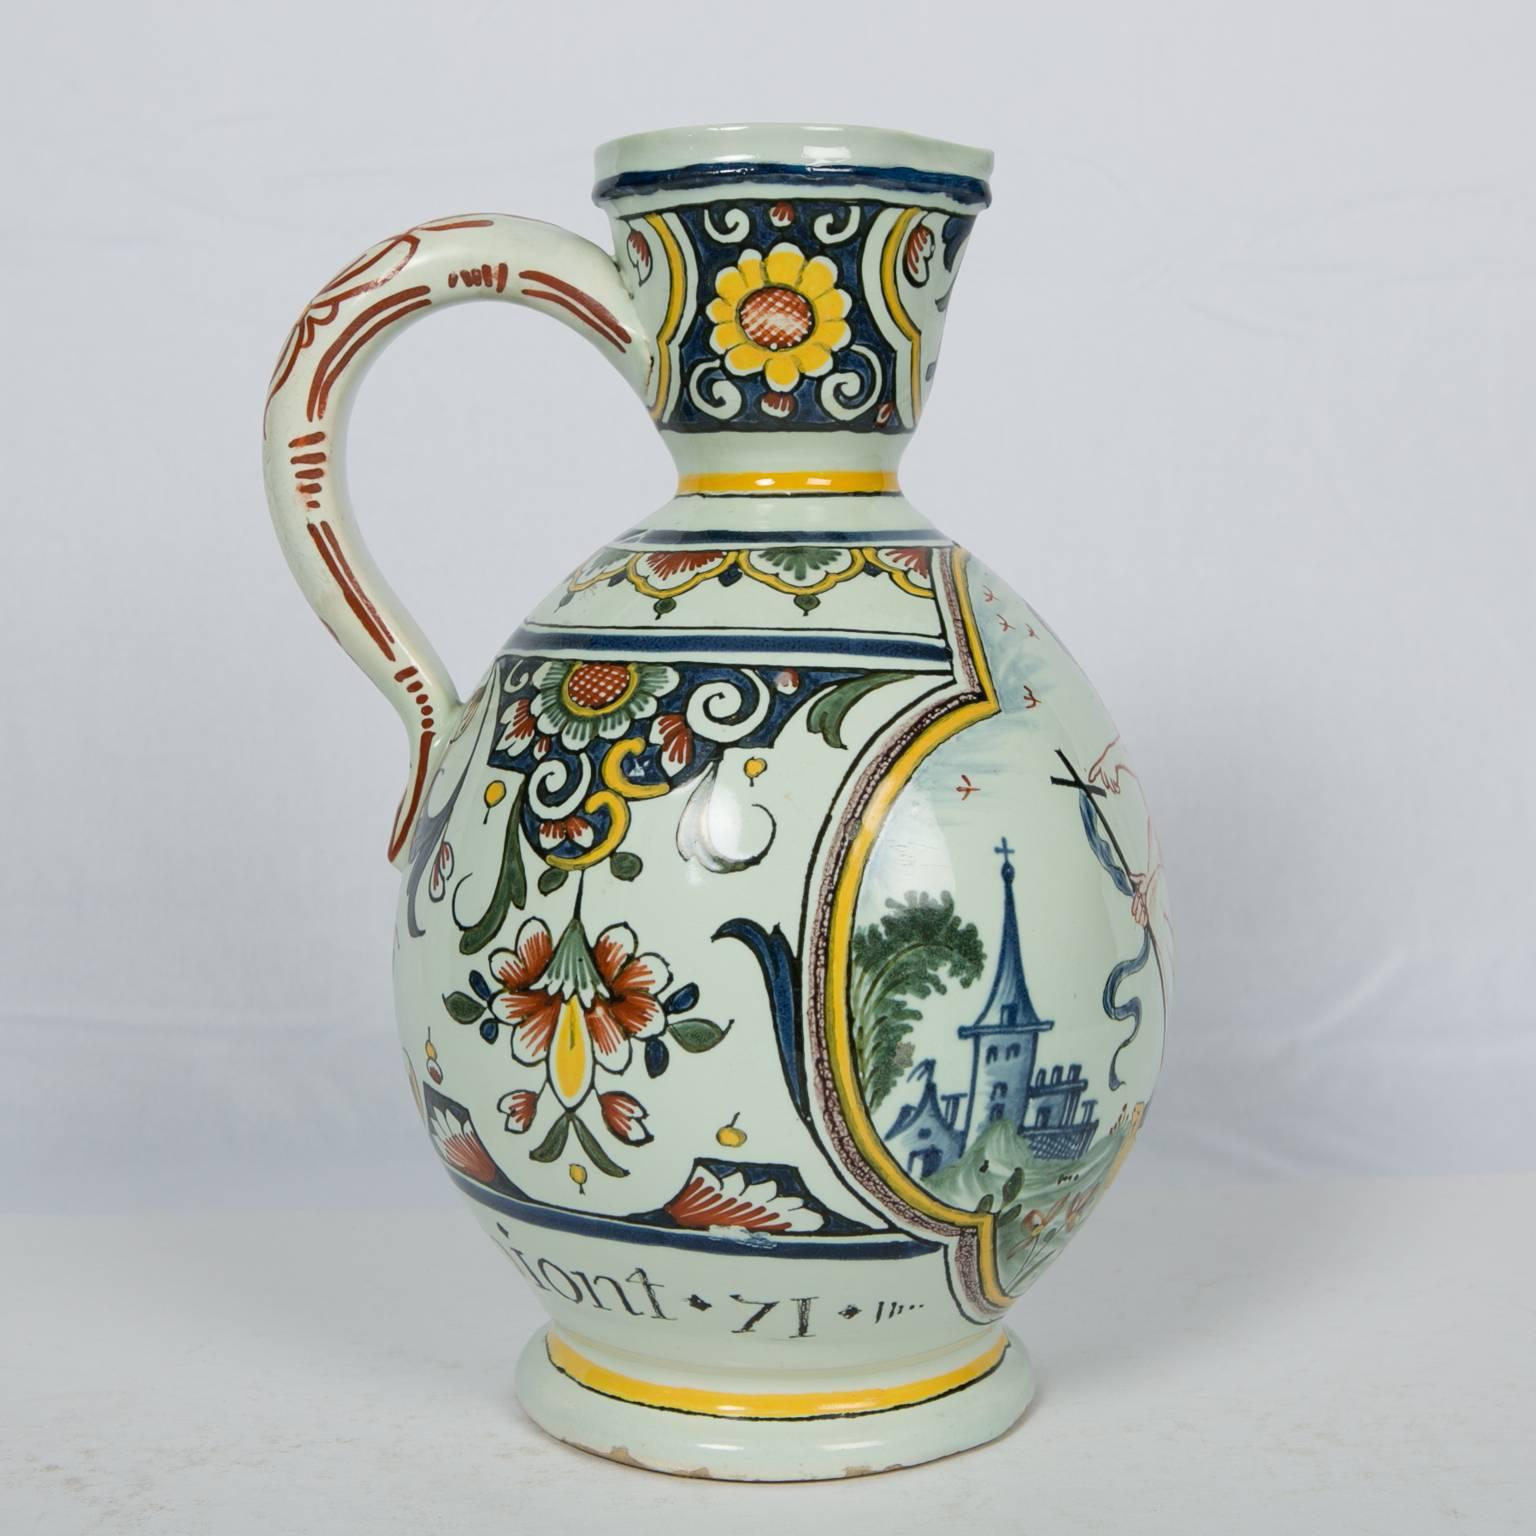 19th Century John the Baptist Depicted on a French Faience Pitcher Made circa 1880